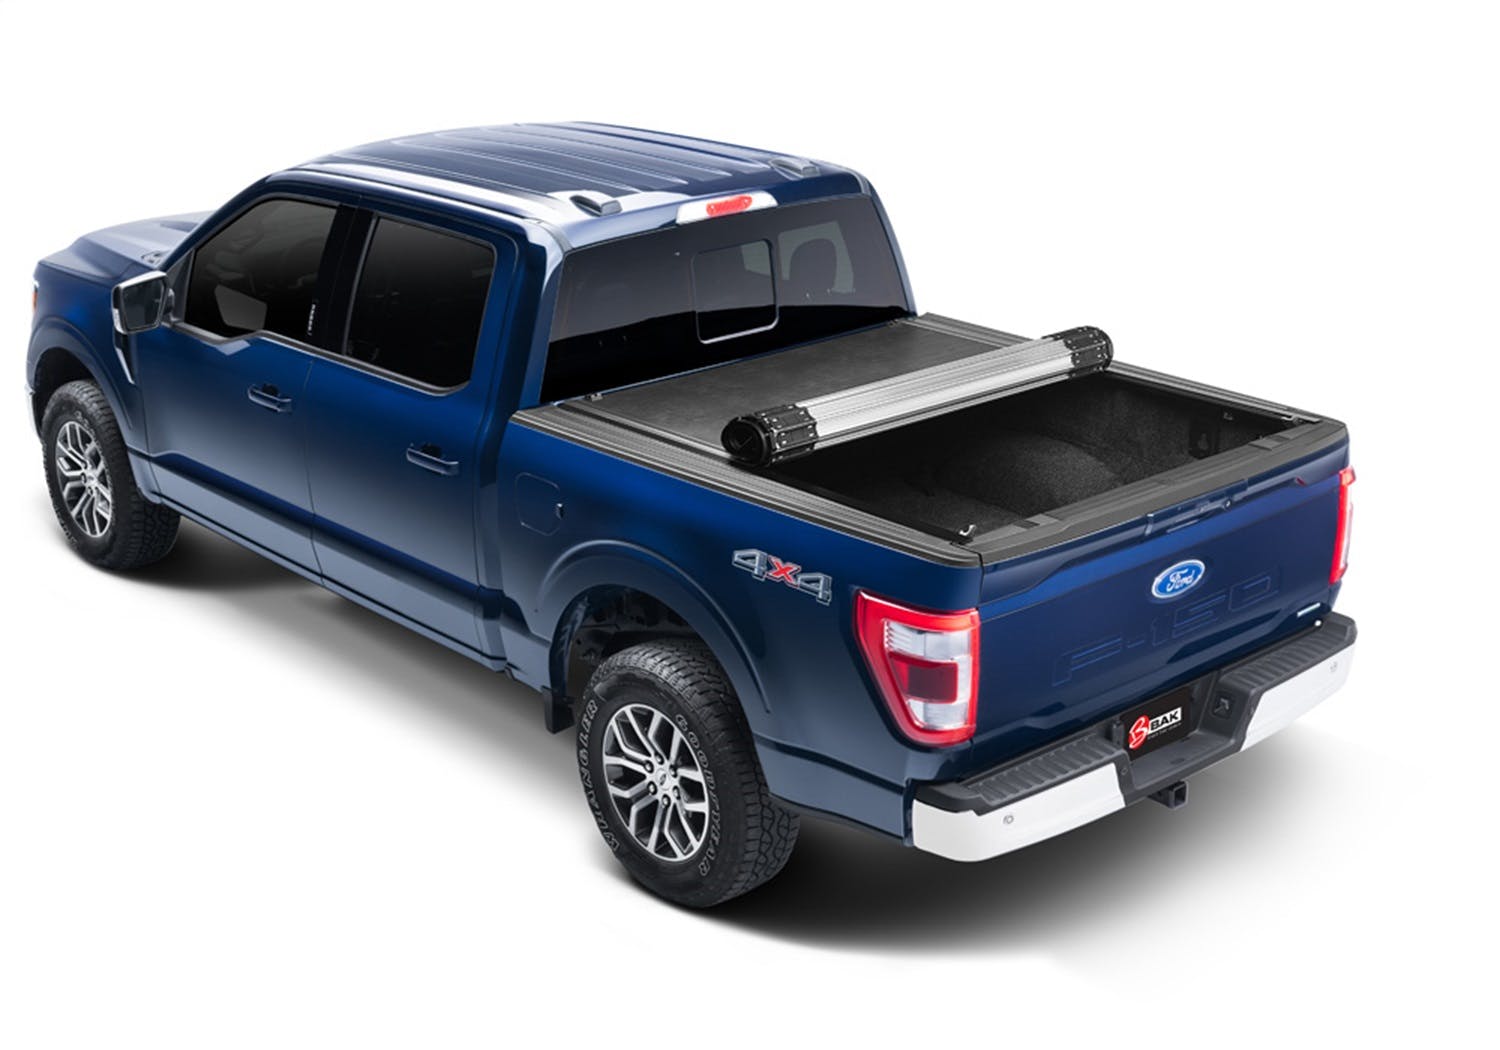 BAK Industries 39324 Revolver X2 Hard Rolling Truck Bed Cover